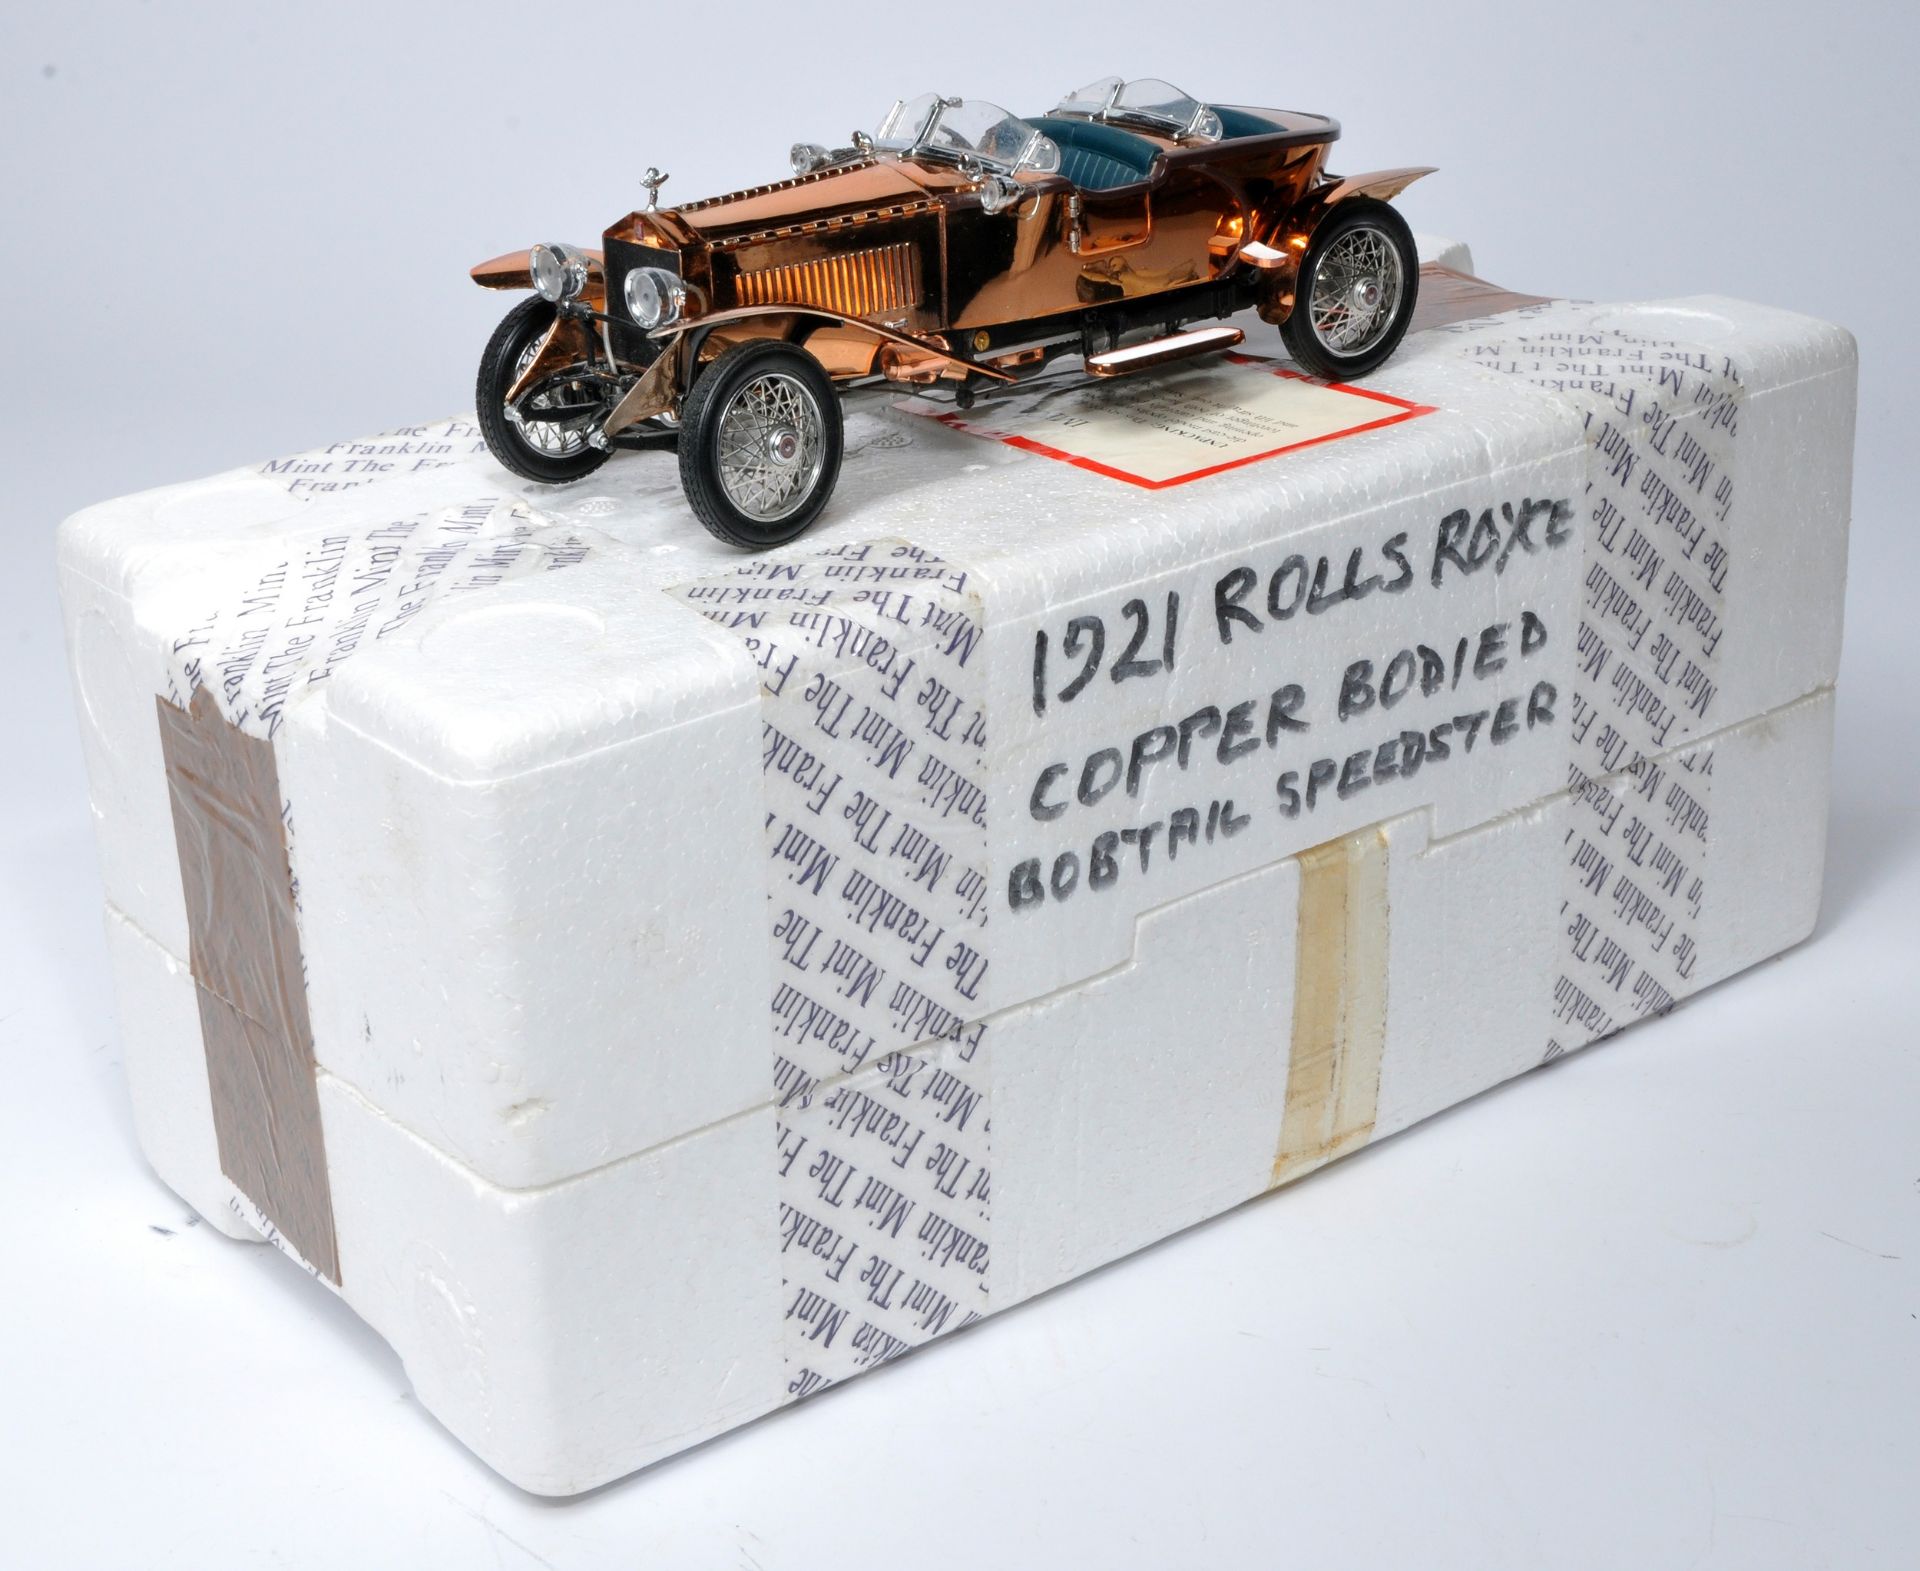 Franklin Mint 1/24 diecast model issue comprising 1921 Rolls Royce Copper Body. Looks to be